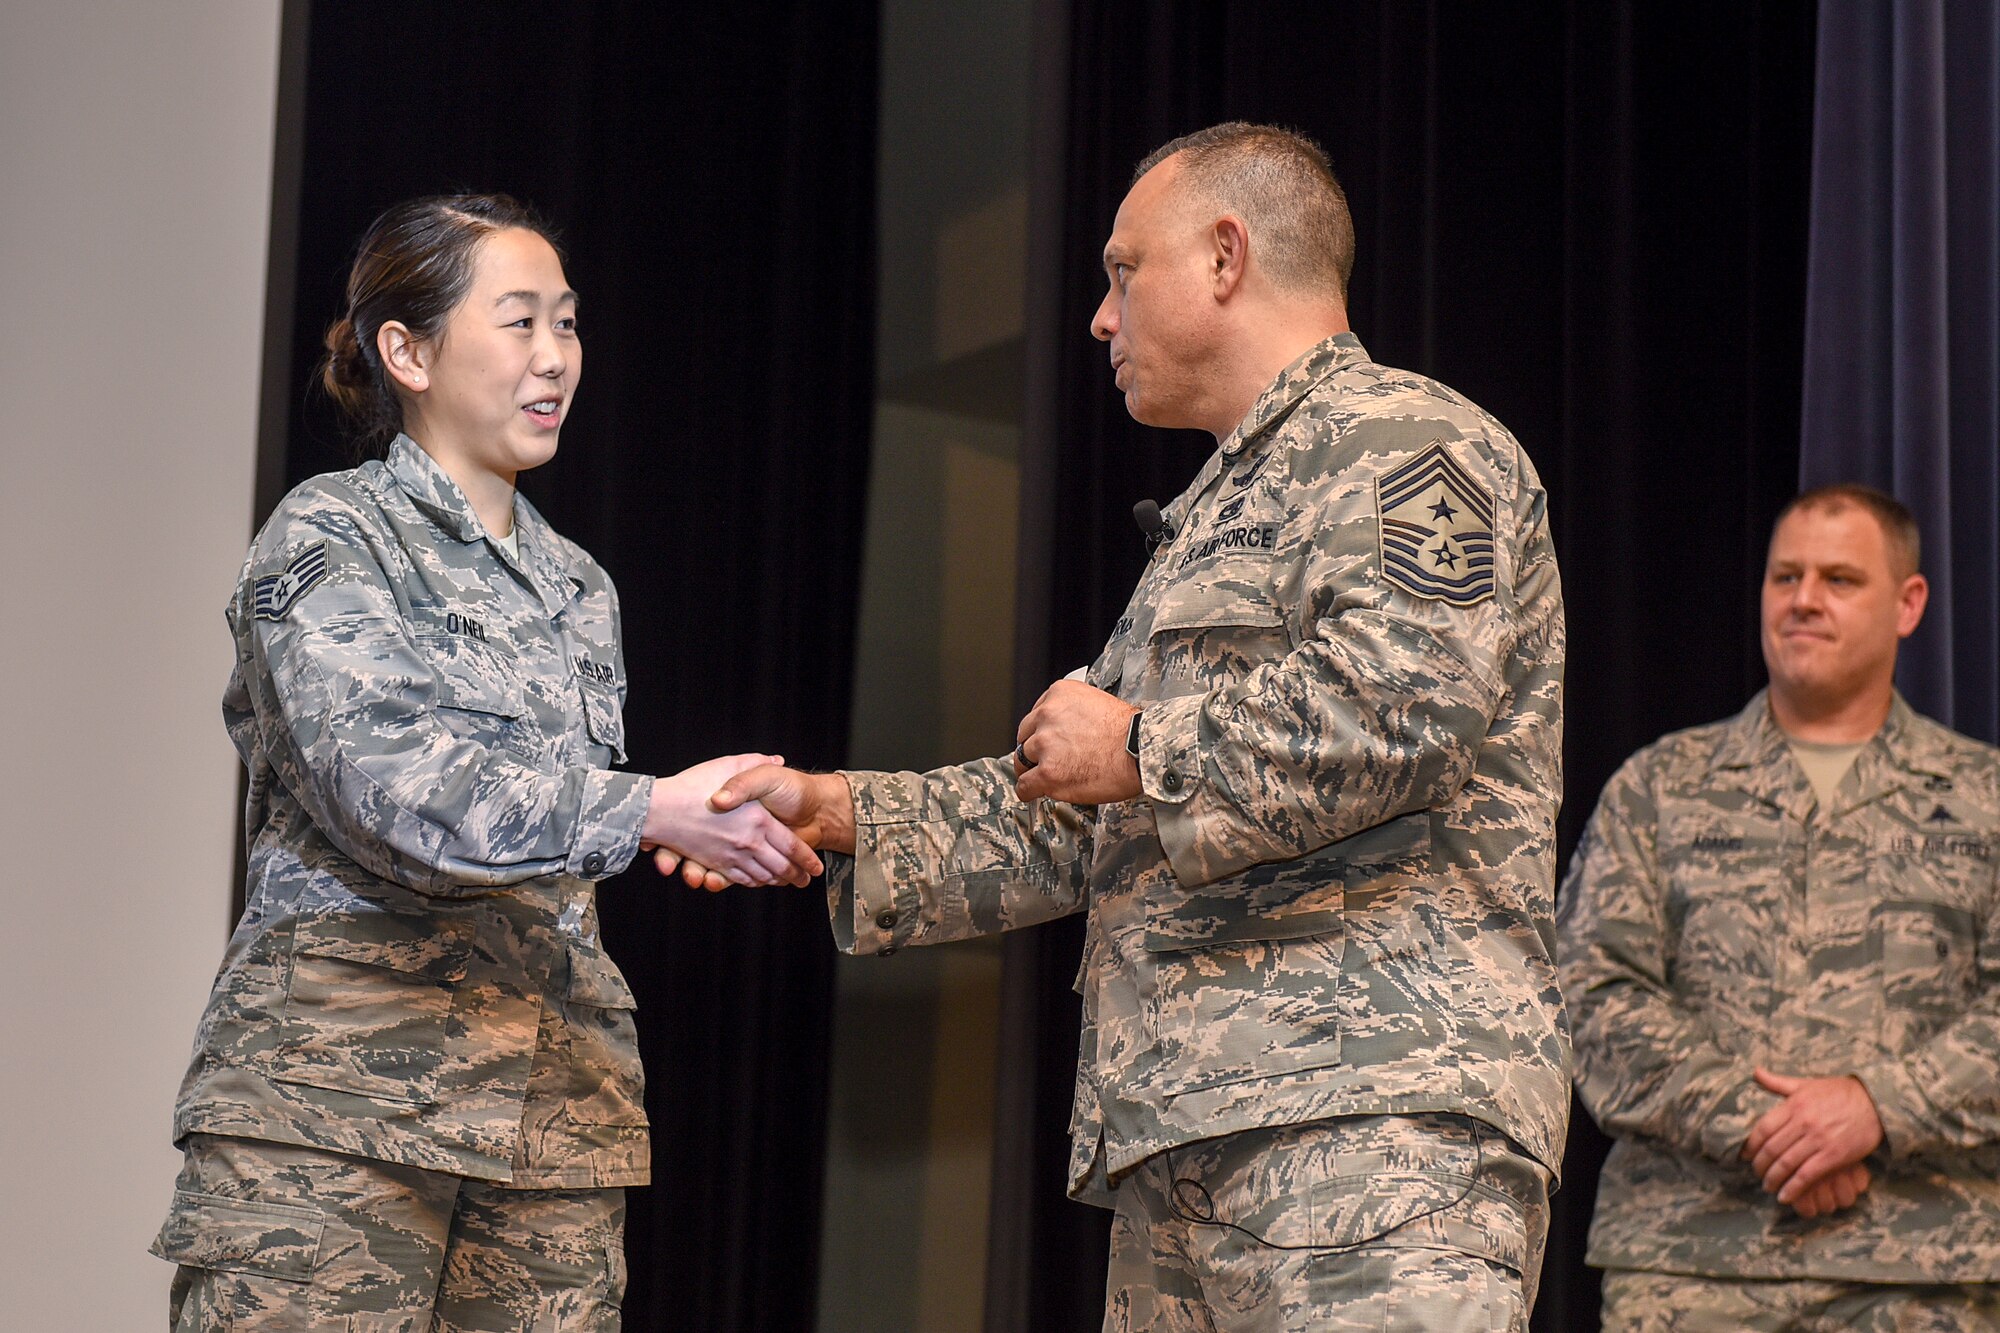 Chief Master Sgt. Matthew Caruso, command senior enlisted leader of U.S. Transportation Command, coins Staff Sgt. Heidi O'Neil, 4th Aircraft Maintenance Squadron personnel technician, for her outstanding performance during a senior NCO all call at the theater Feb. 15, 2018, at Seymour Johnson Air Force Base, North Carolina.